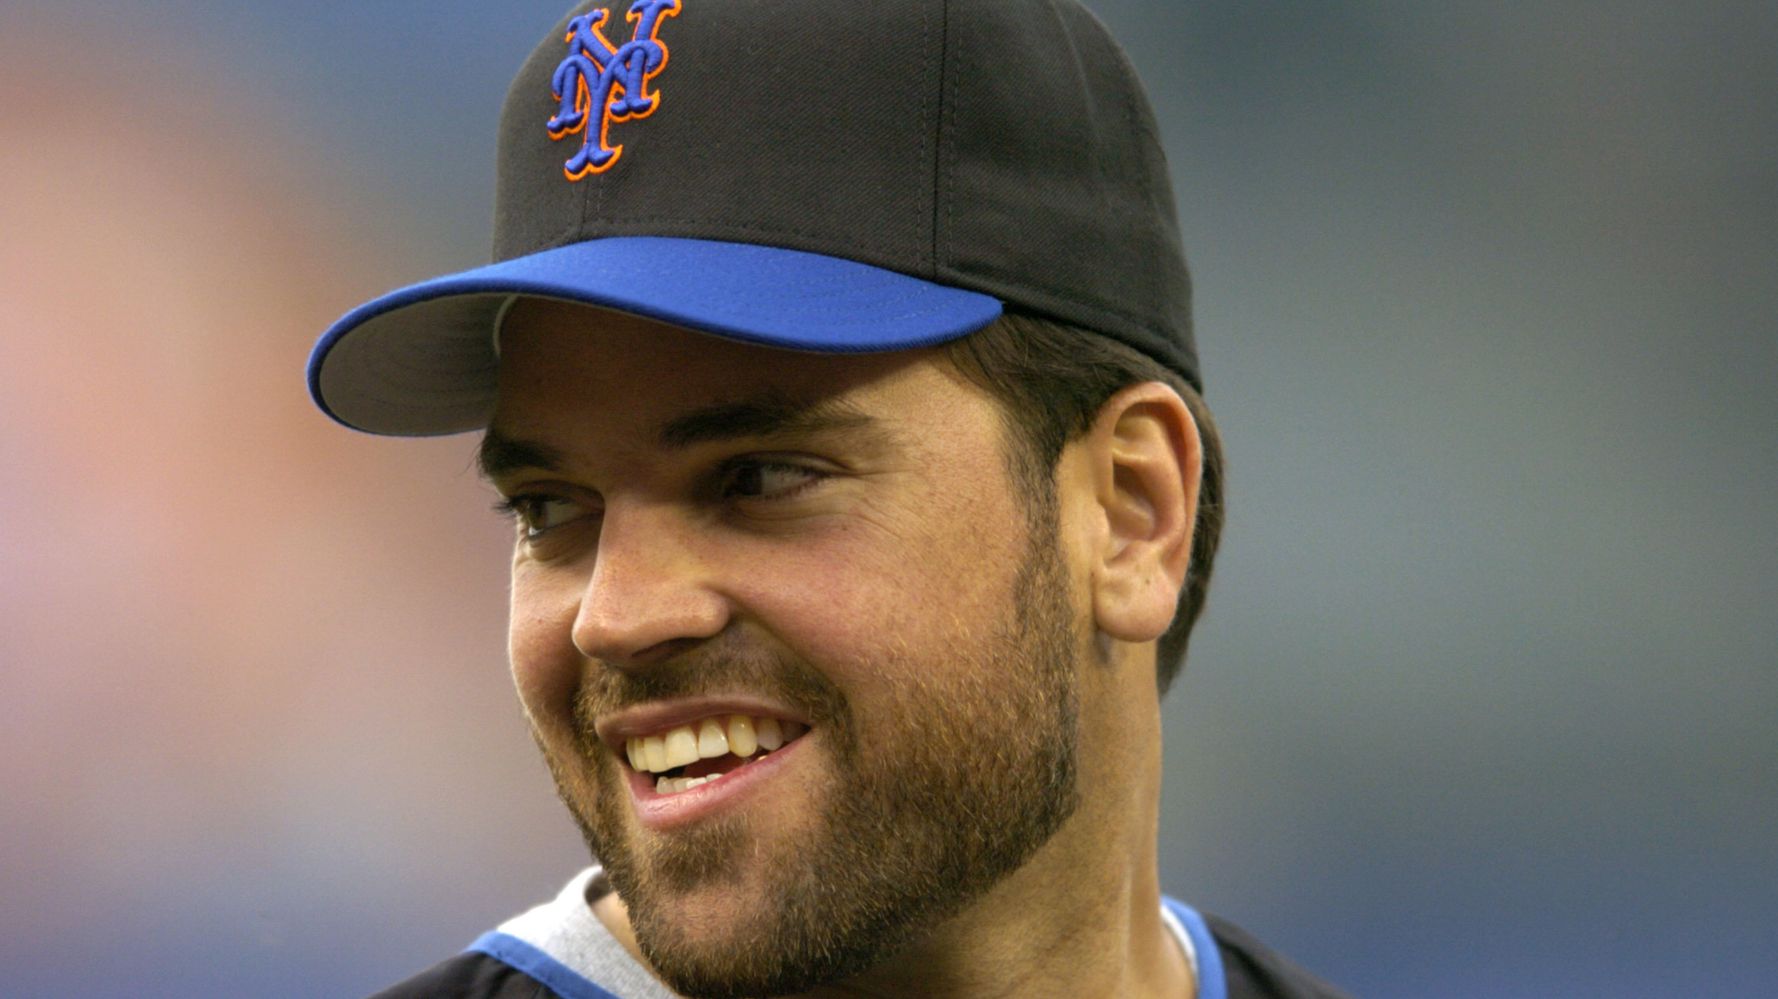 SNY - Mike Piazza on Tom Seaver: Tom was always rooting